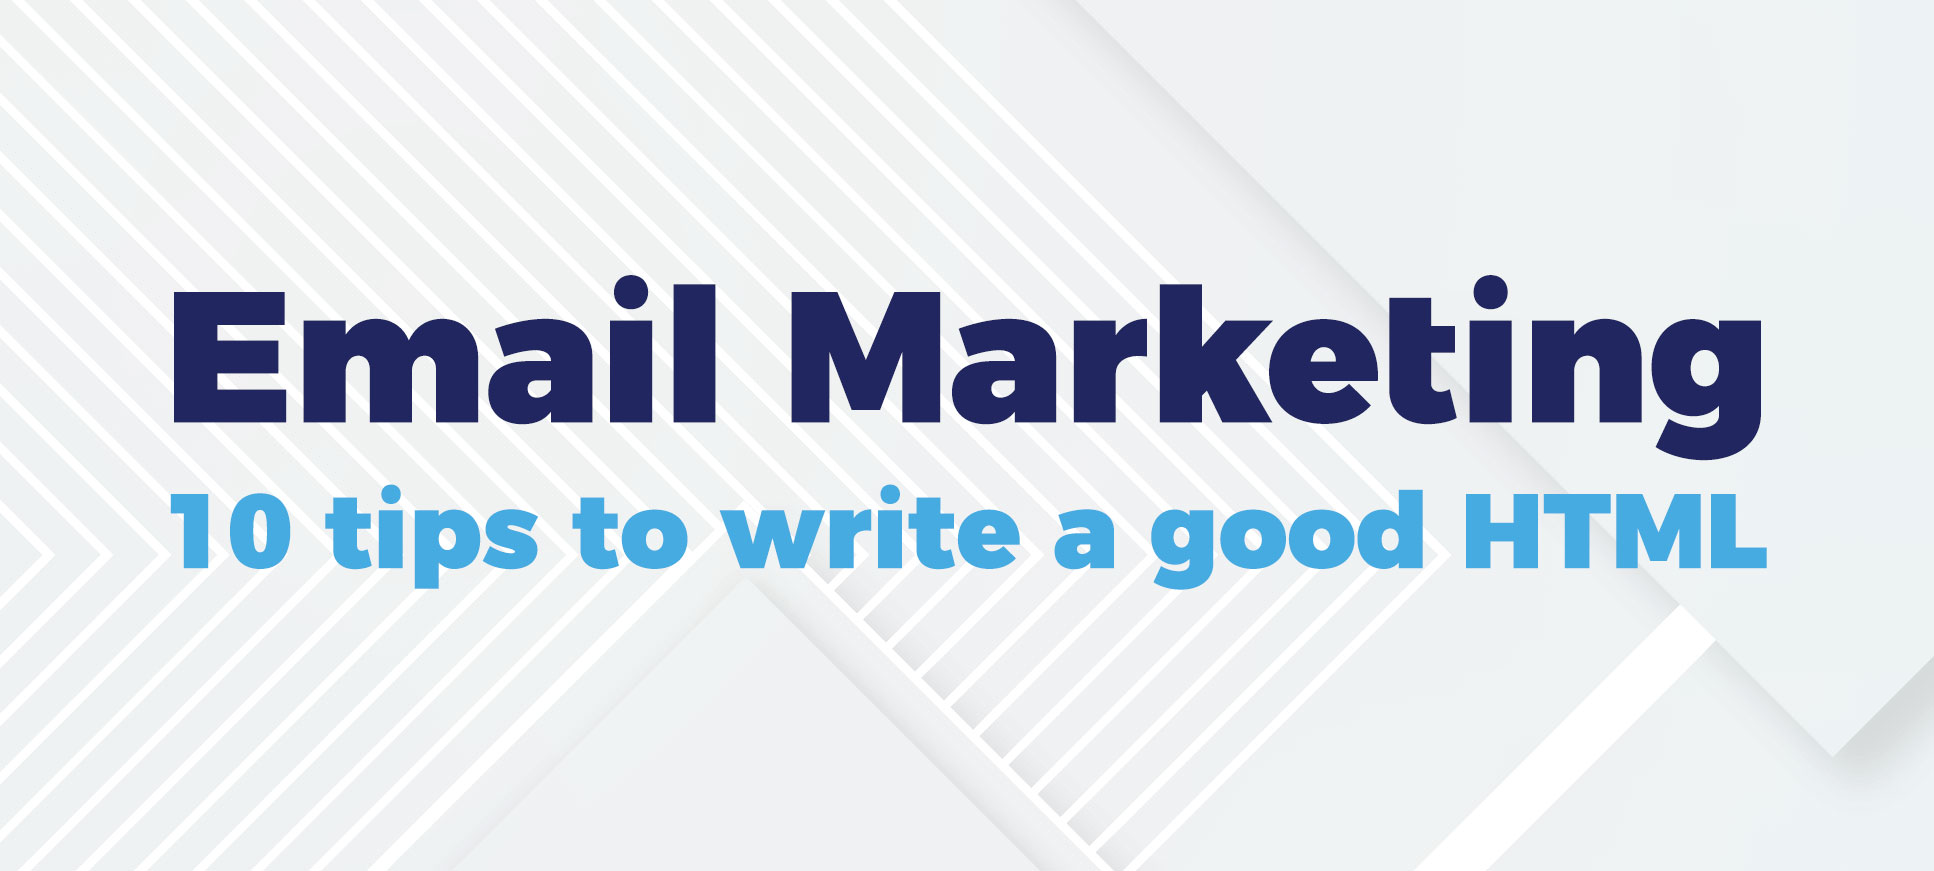 Email marketing 10 tips to write a good html